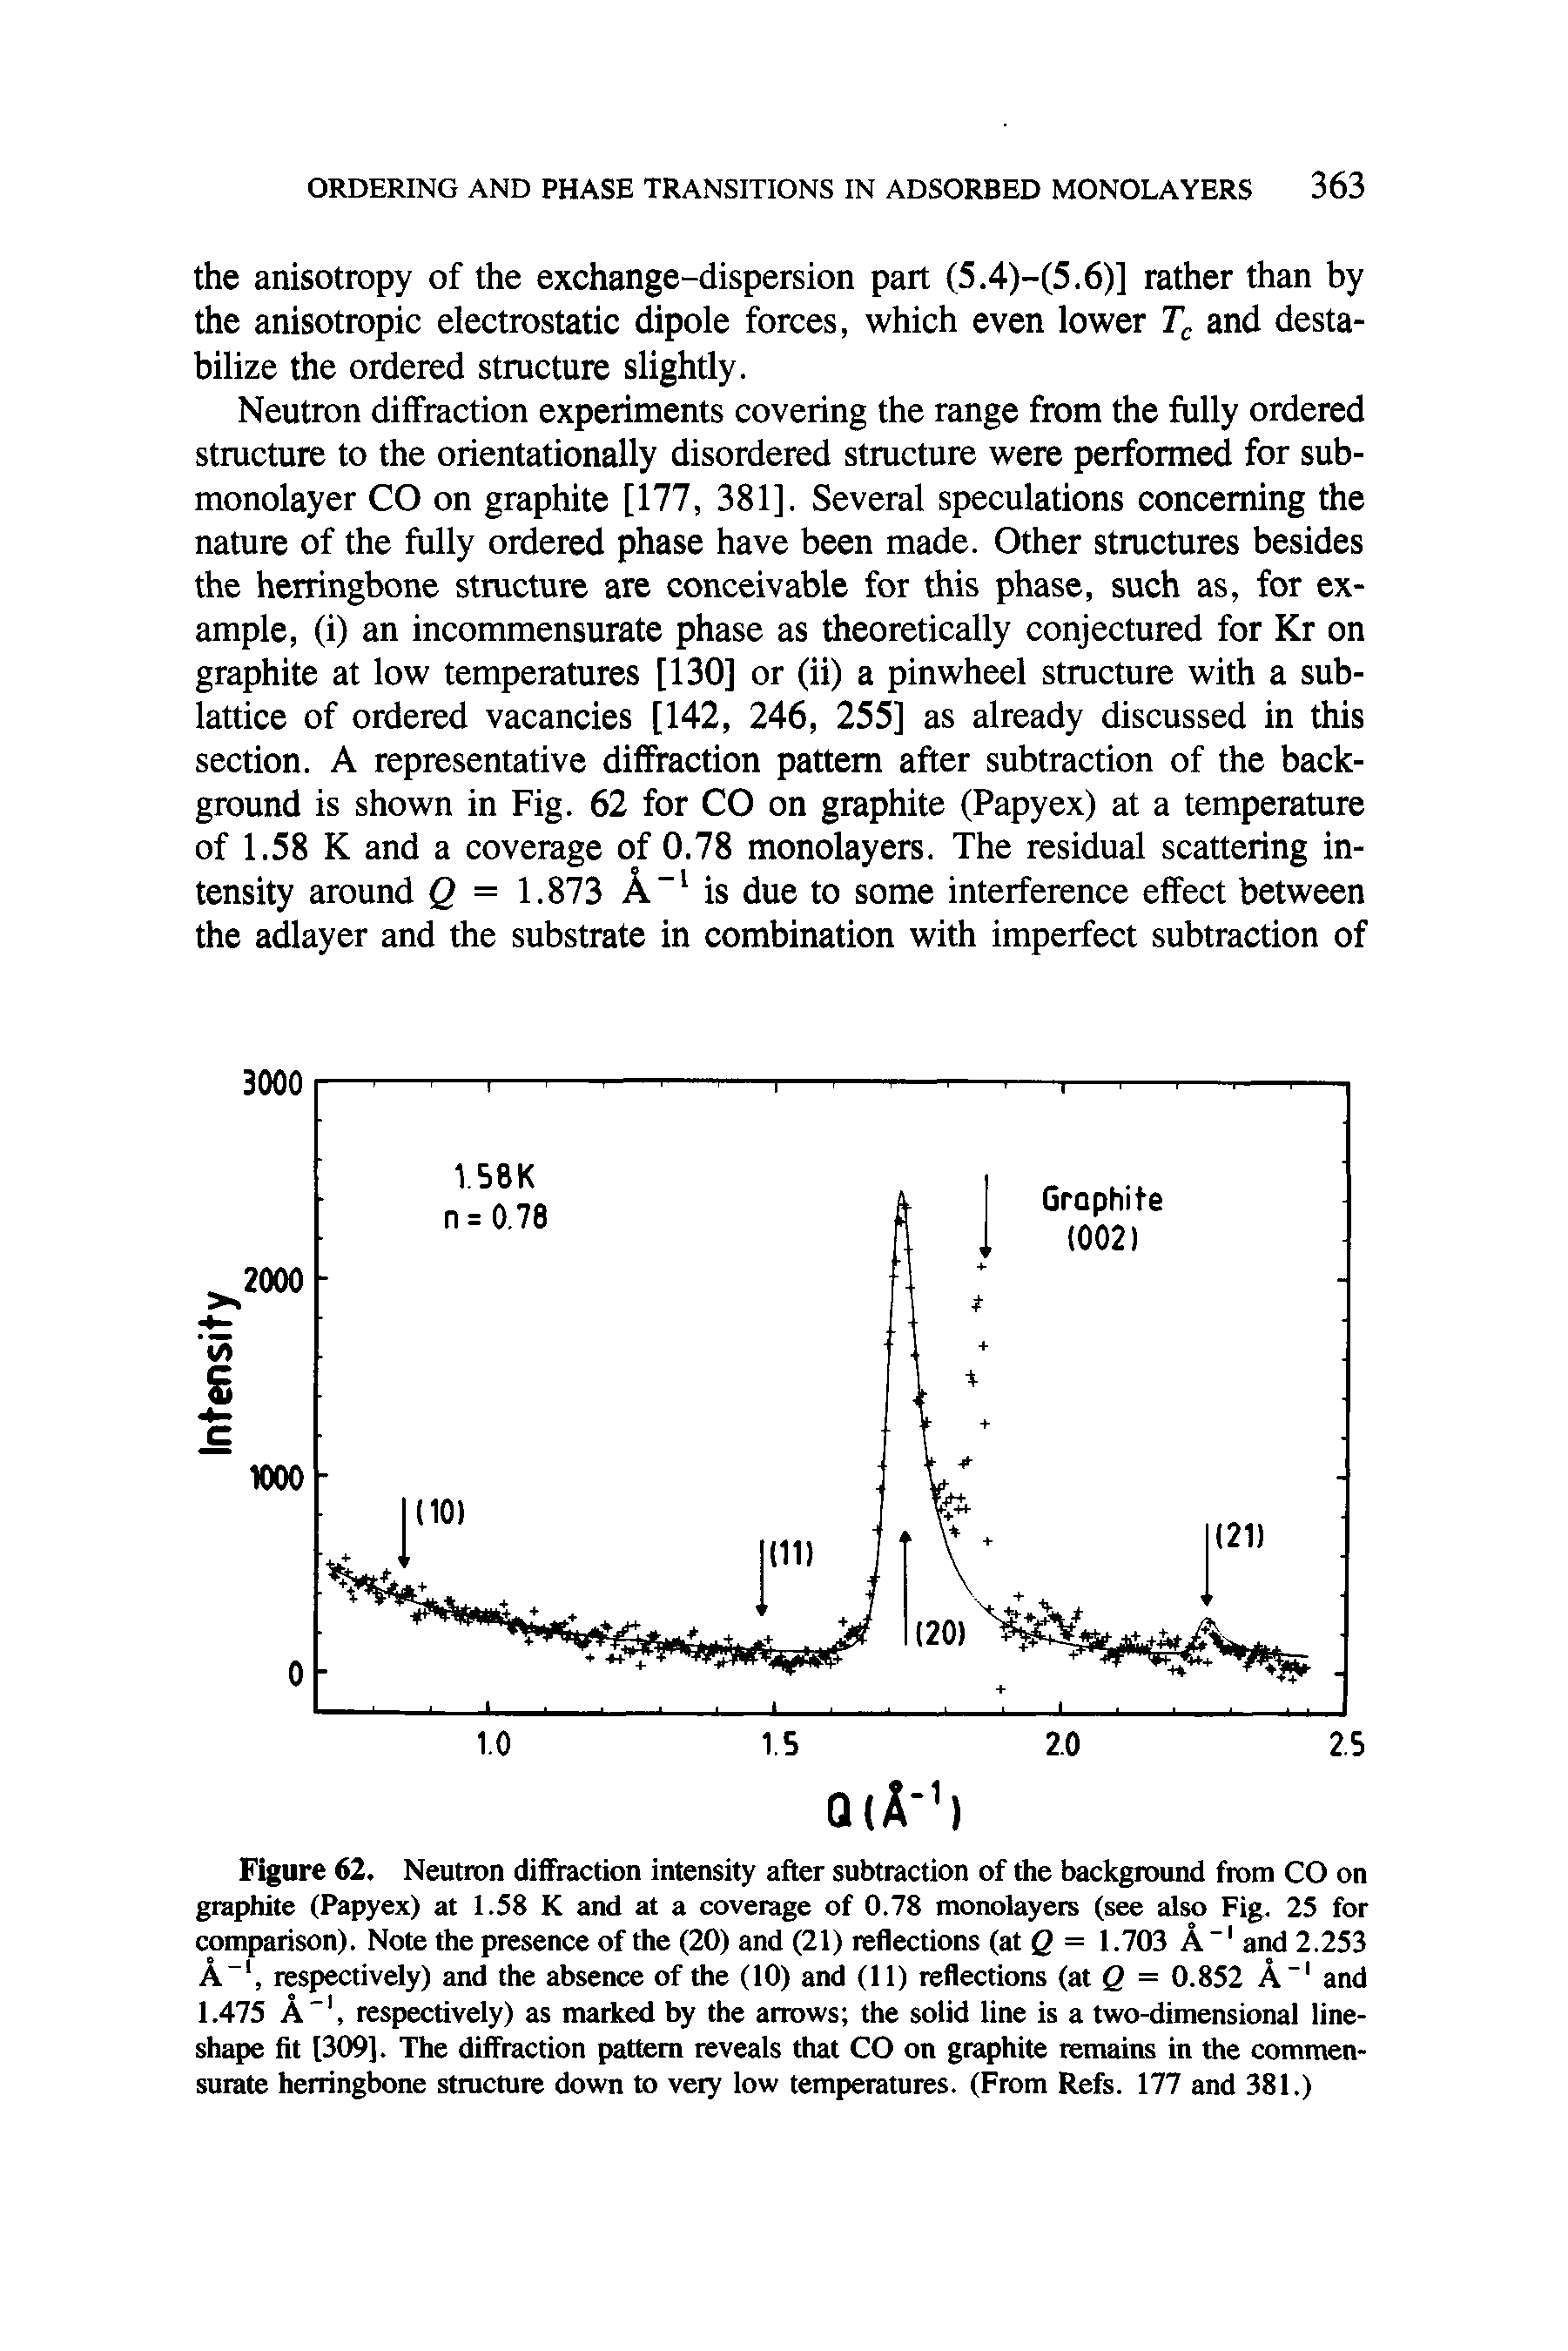 Figure 62. Neutron diffraction intensity after subtraction of the background from CO on graphite (Papyex) at 1.58 K and at a coverage of 0.78 monolayers (see also Fig. 25 for comparison). Note the presence of the (20) and (21) reflections (at Q = 1.703 A and 2.253 A , respectively) and the absence of the (10) and (11) reflections (at Q = 0.852 A" and 1.475 A", respectively) as marked by the arrows the solid line is a two-dimensional line-shape fit [309]. The diffraction pattern reveals that CO on graphite remains in the commensurate herringbone stmcwre down to very low temperatures. (From Refs. 177 and 381.)...